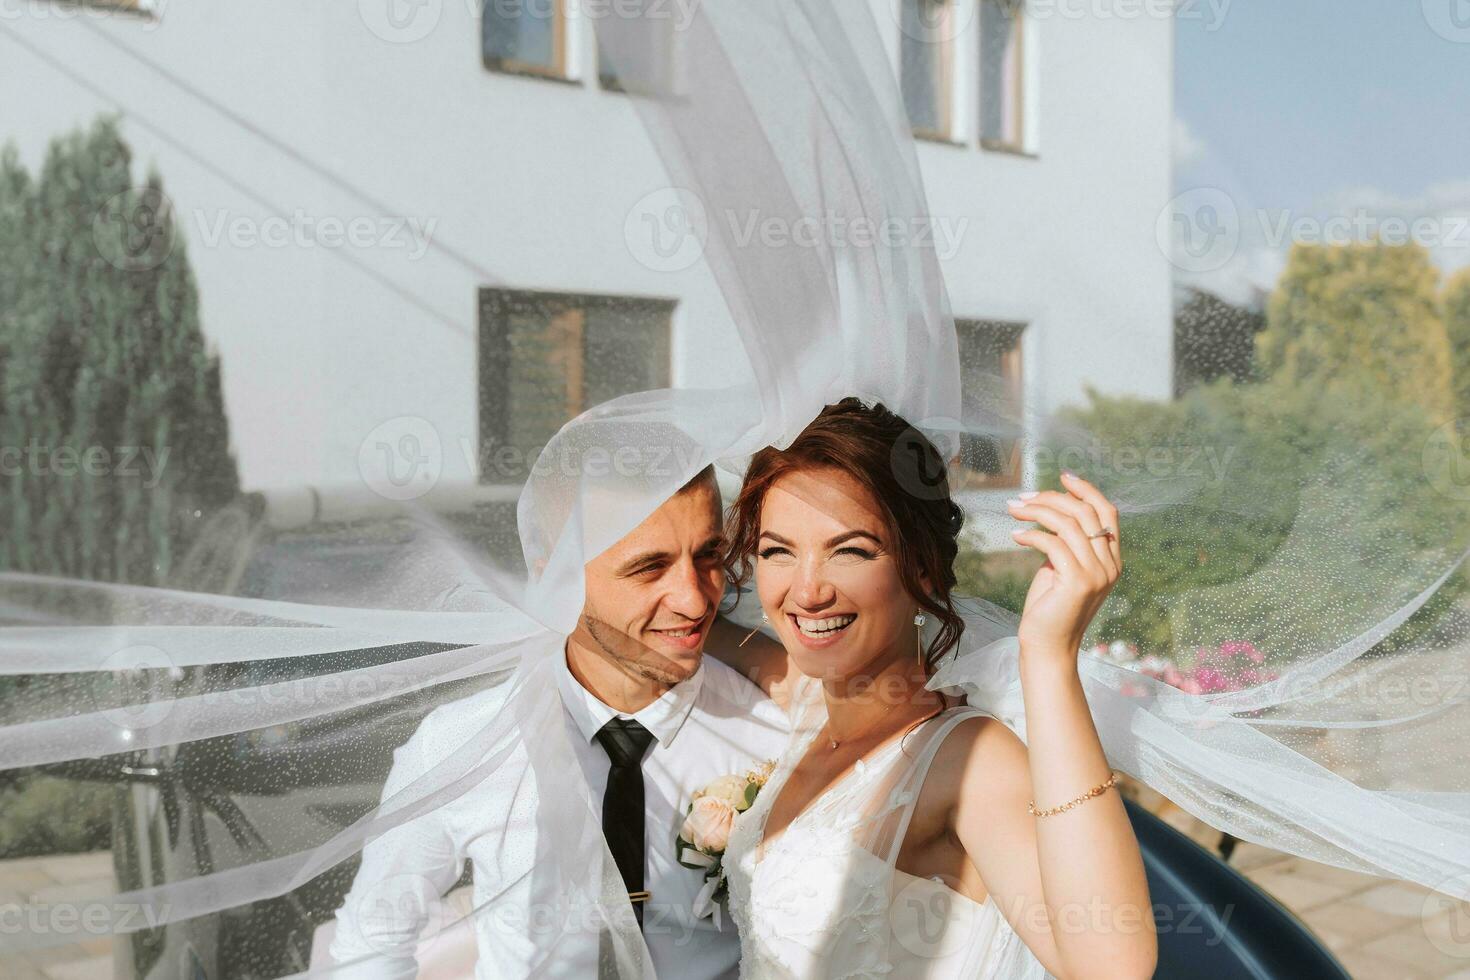 Wedding portrait. The bride and groom embraced, covered themselves with a veil, and sincerely smiled. Holiday concept. photo